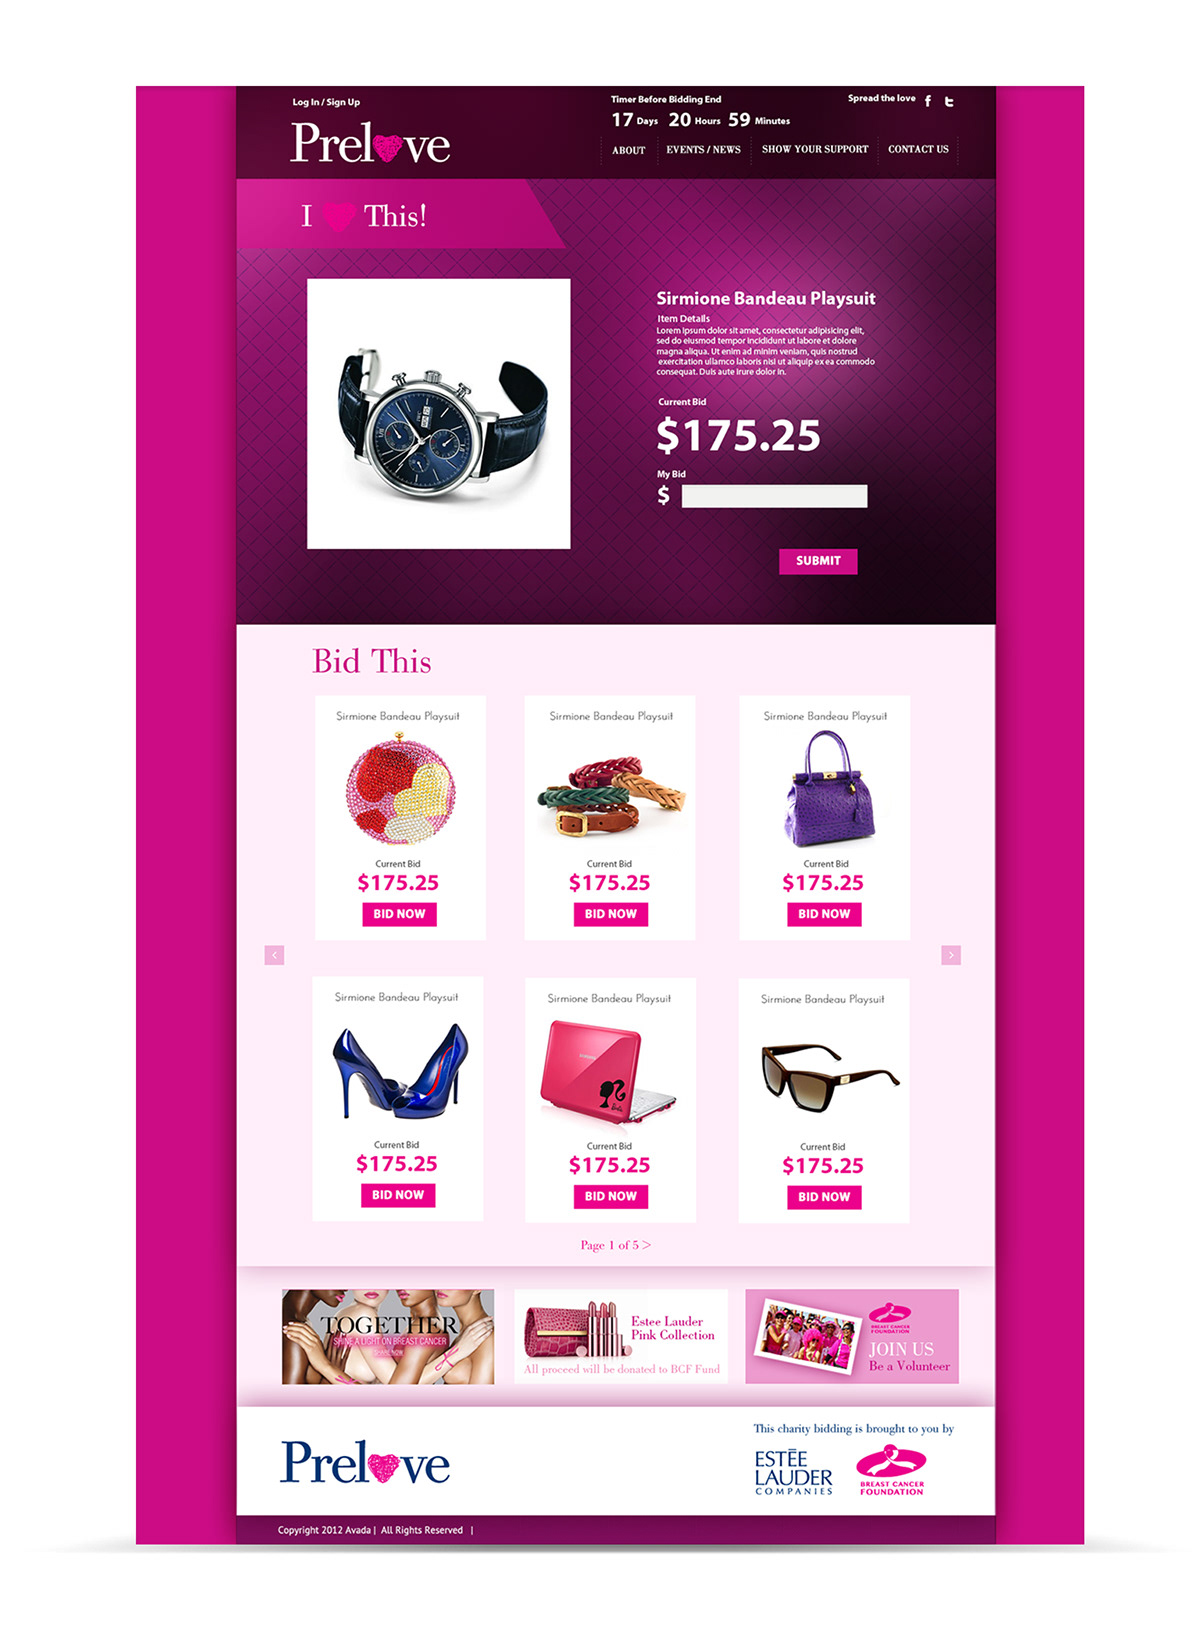 auction Estee Lauder breast cancer charity microsite singapore